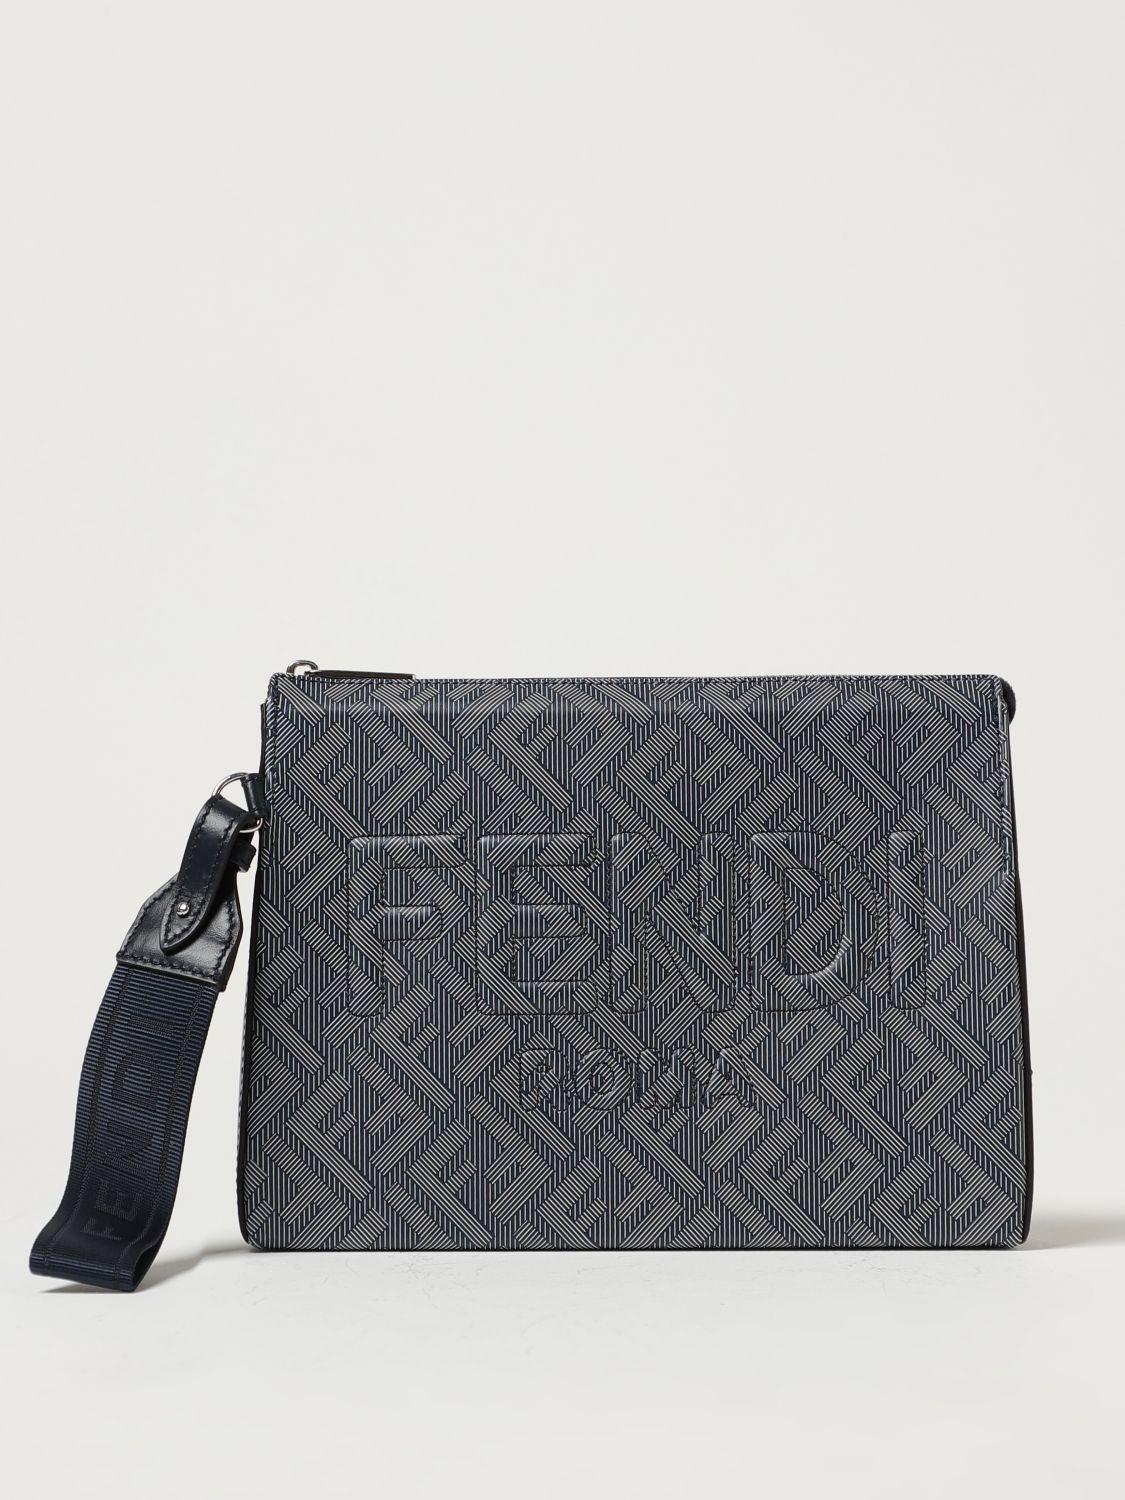 FENDI: Shadow wallet in leather with all-over FF monogram print